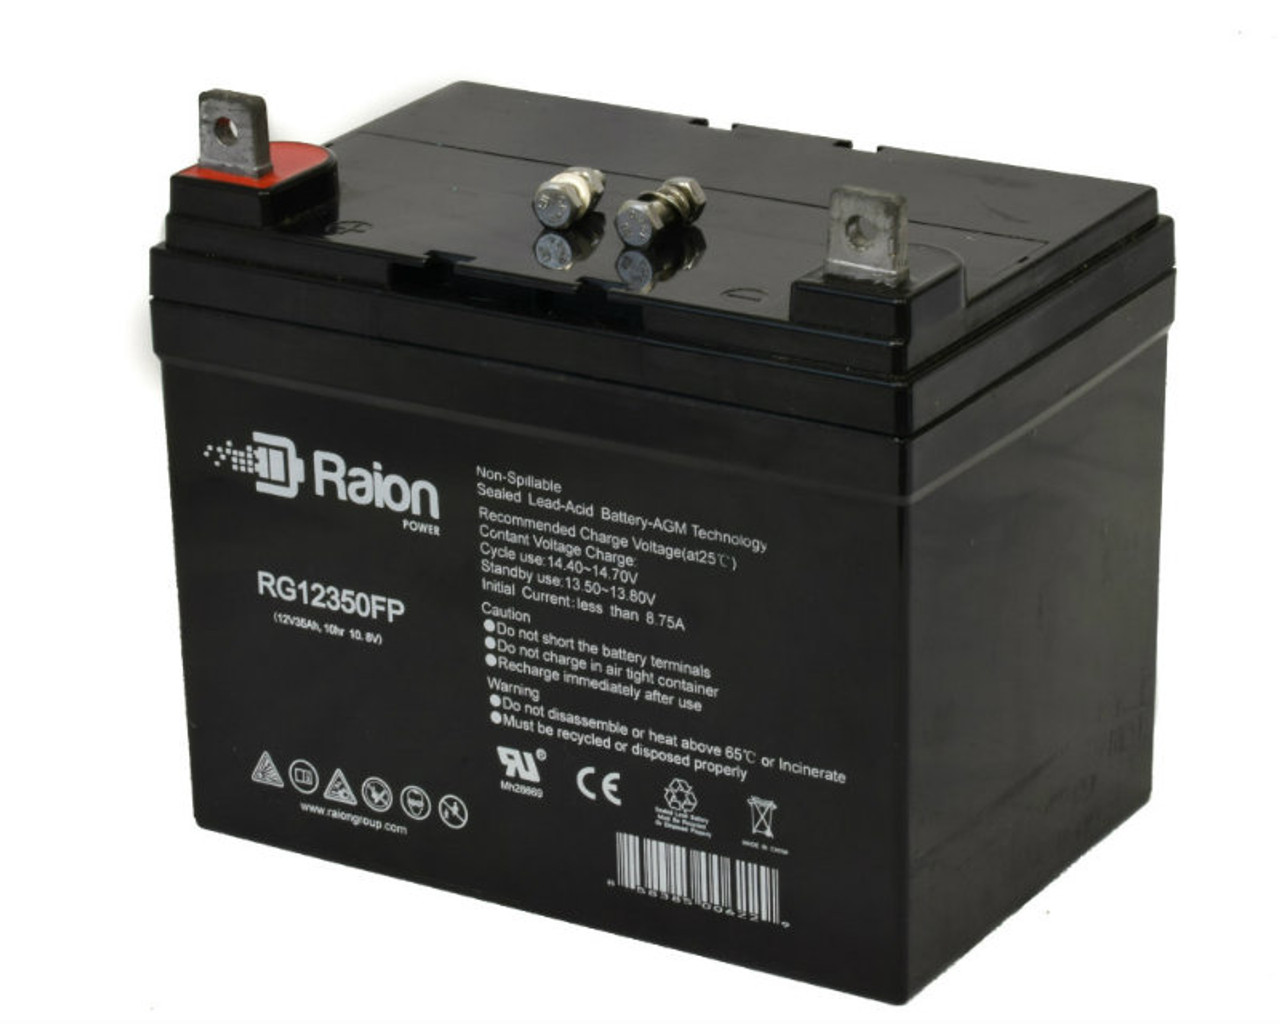 Raion Power Replacement 12V 35Ah RG12350FP Mobility Scooter Battery for Invacare Pronto 250